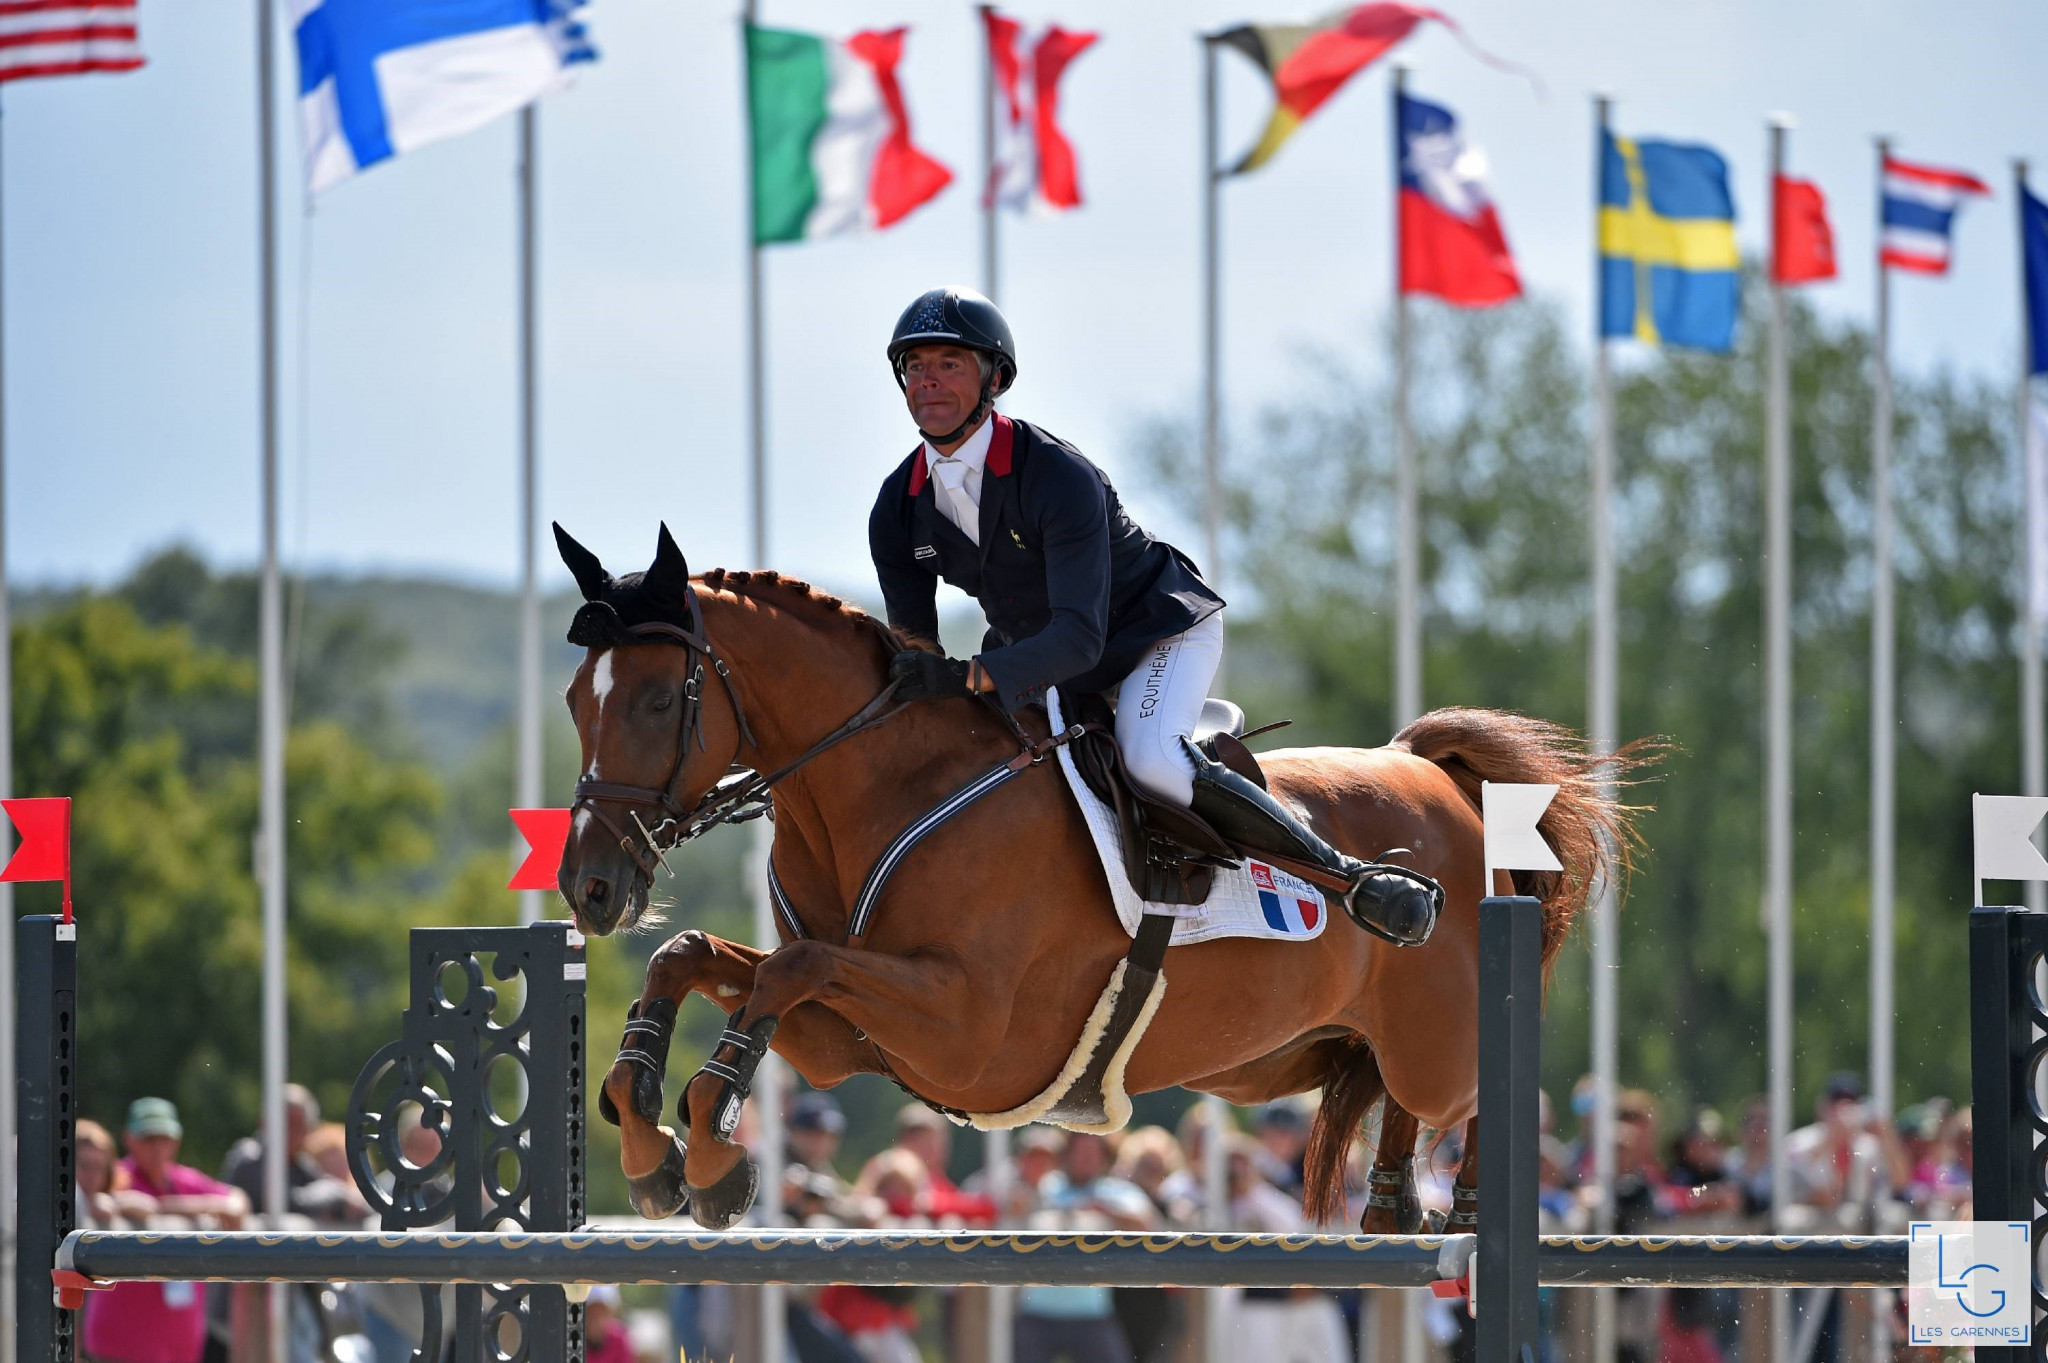 France's Karim Florent Laghouag topped the individual leaderboard at the FEI Eventing Nations Cup in Haras du Pin ©Les Garennes 